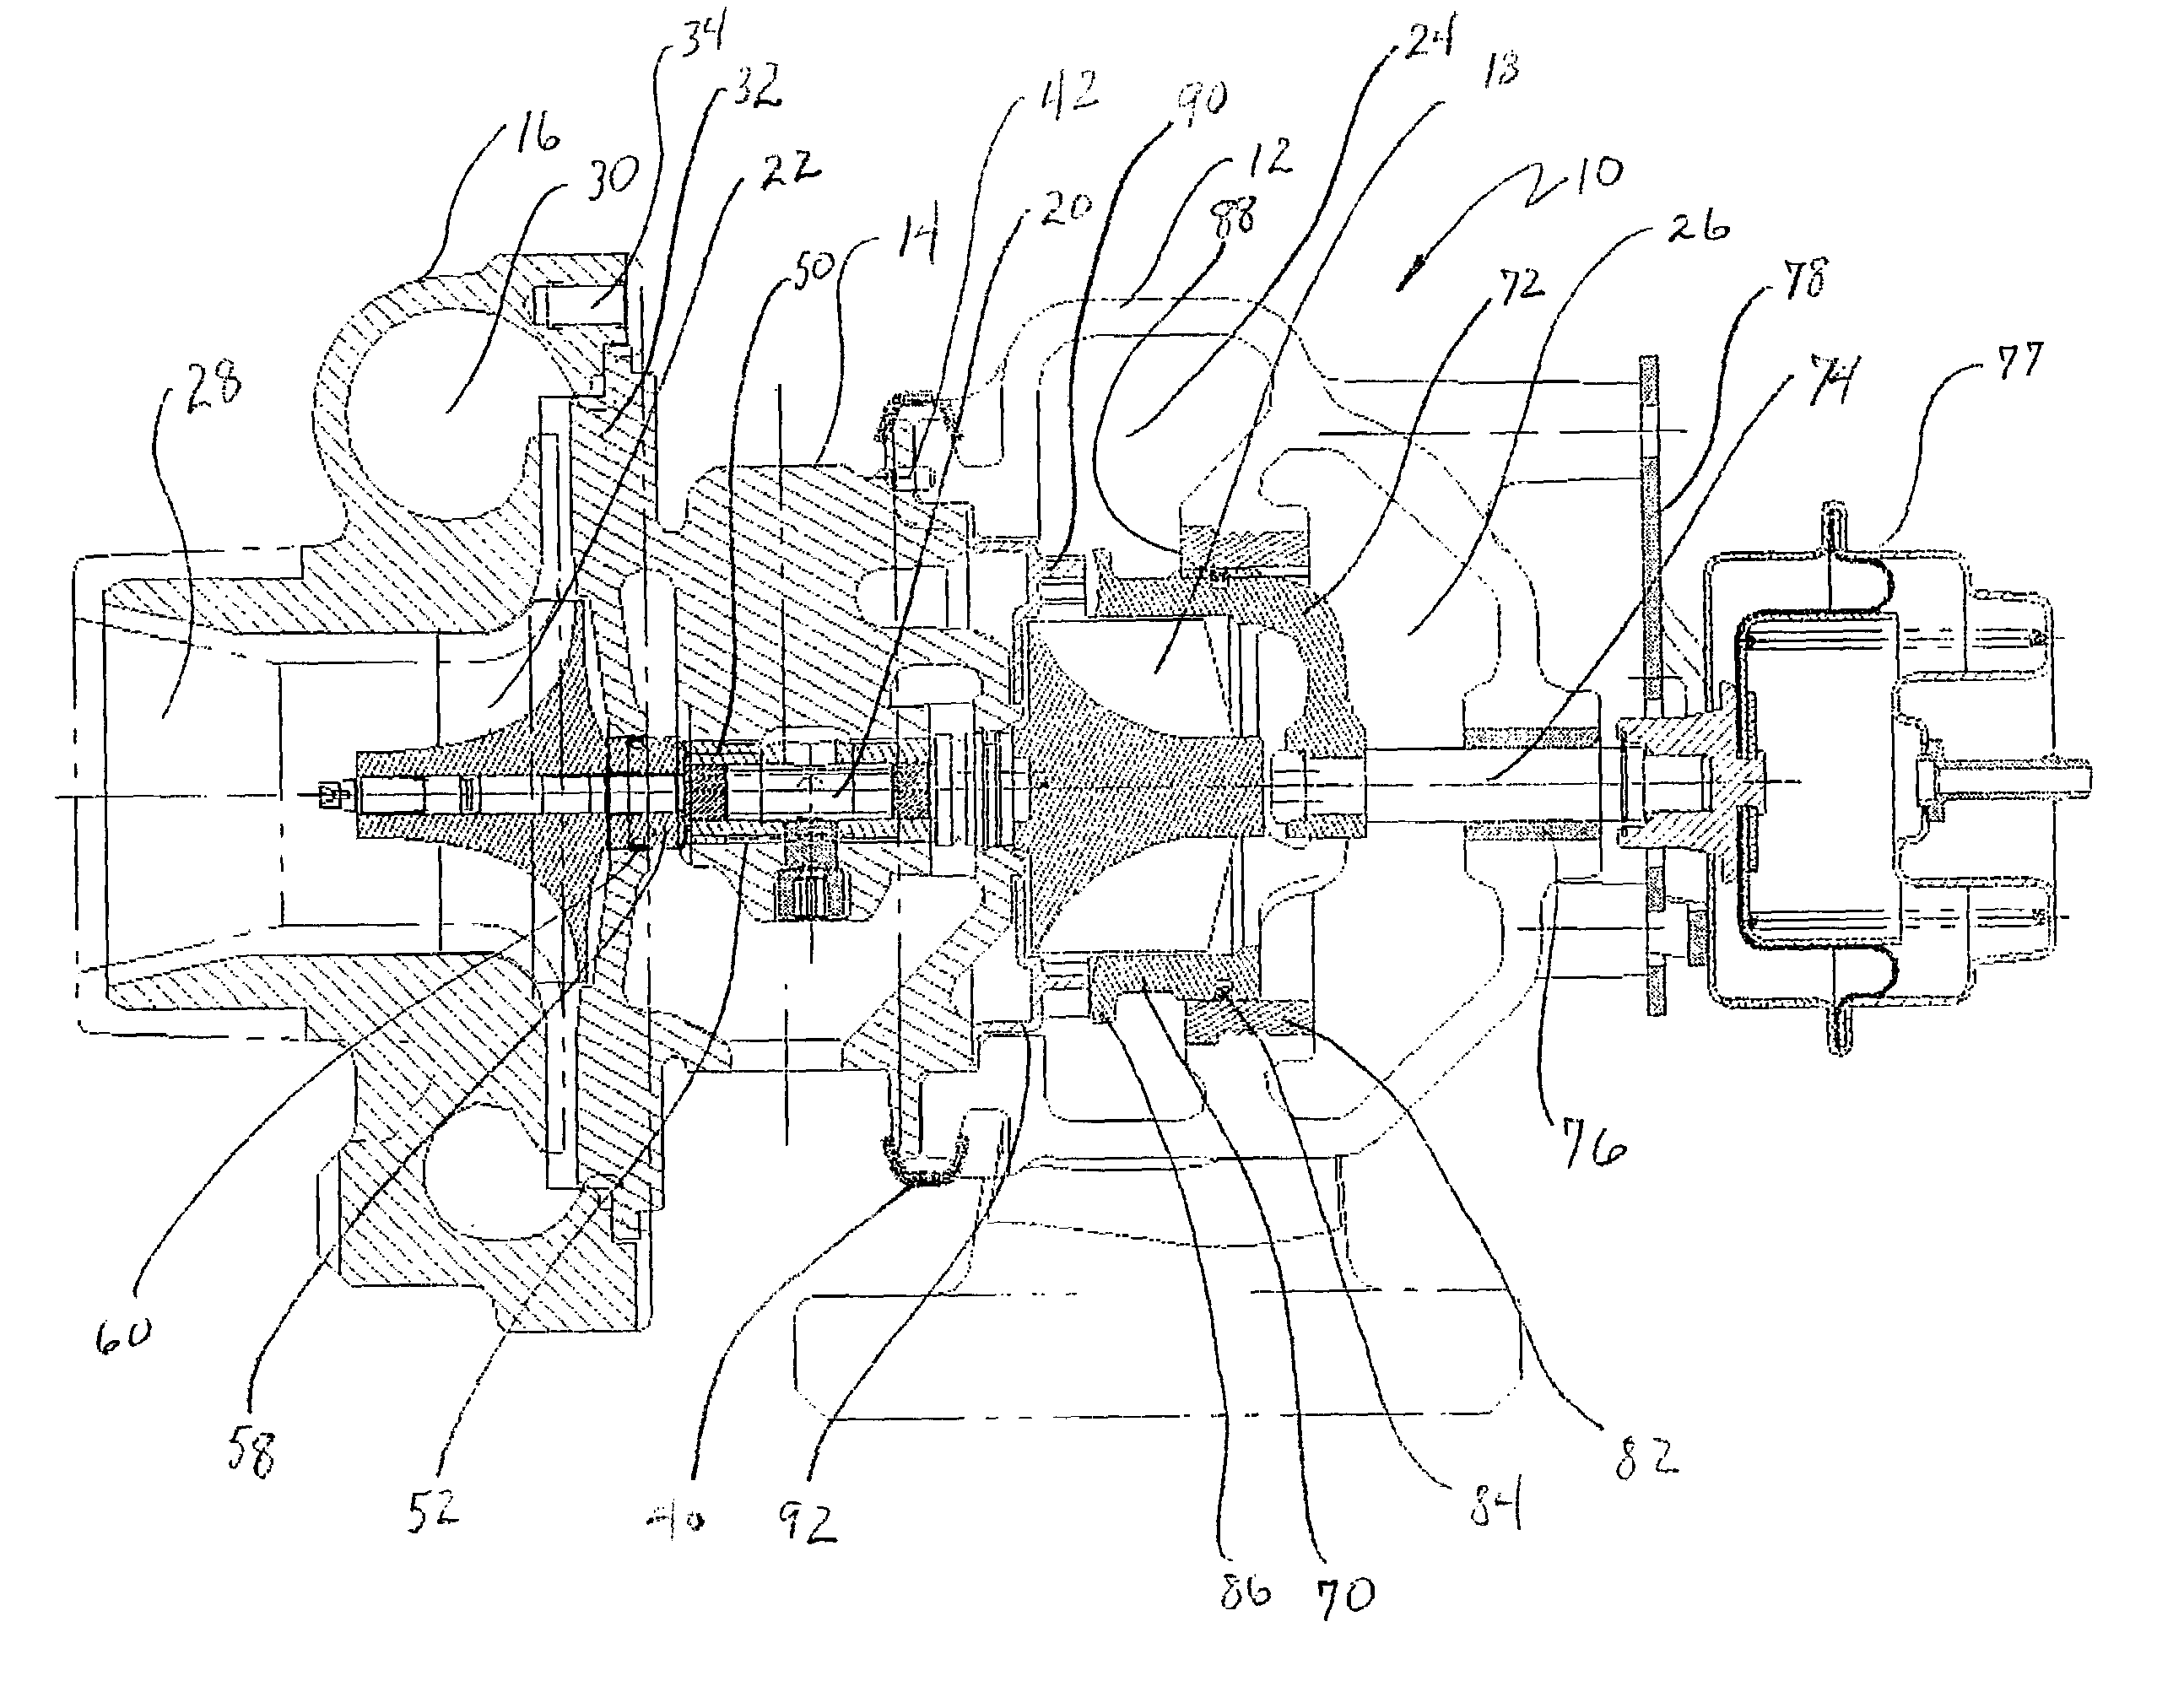 Variable geometry turbocharger with sliding piston